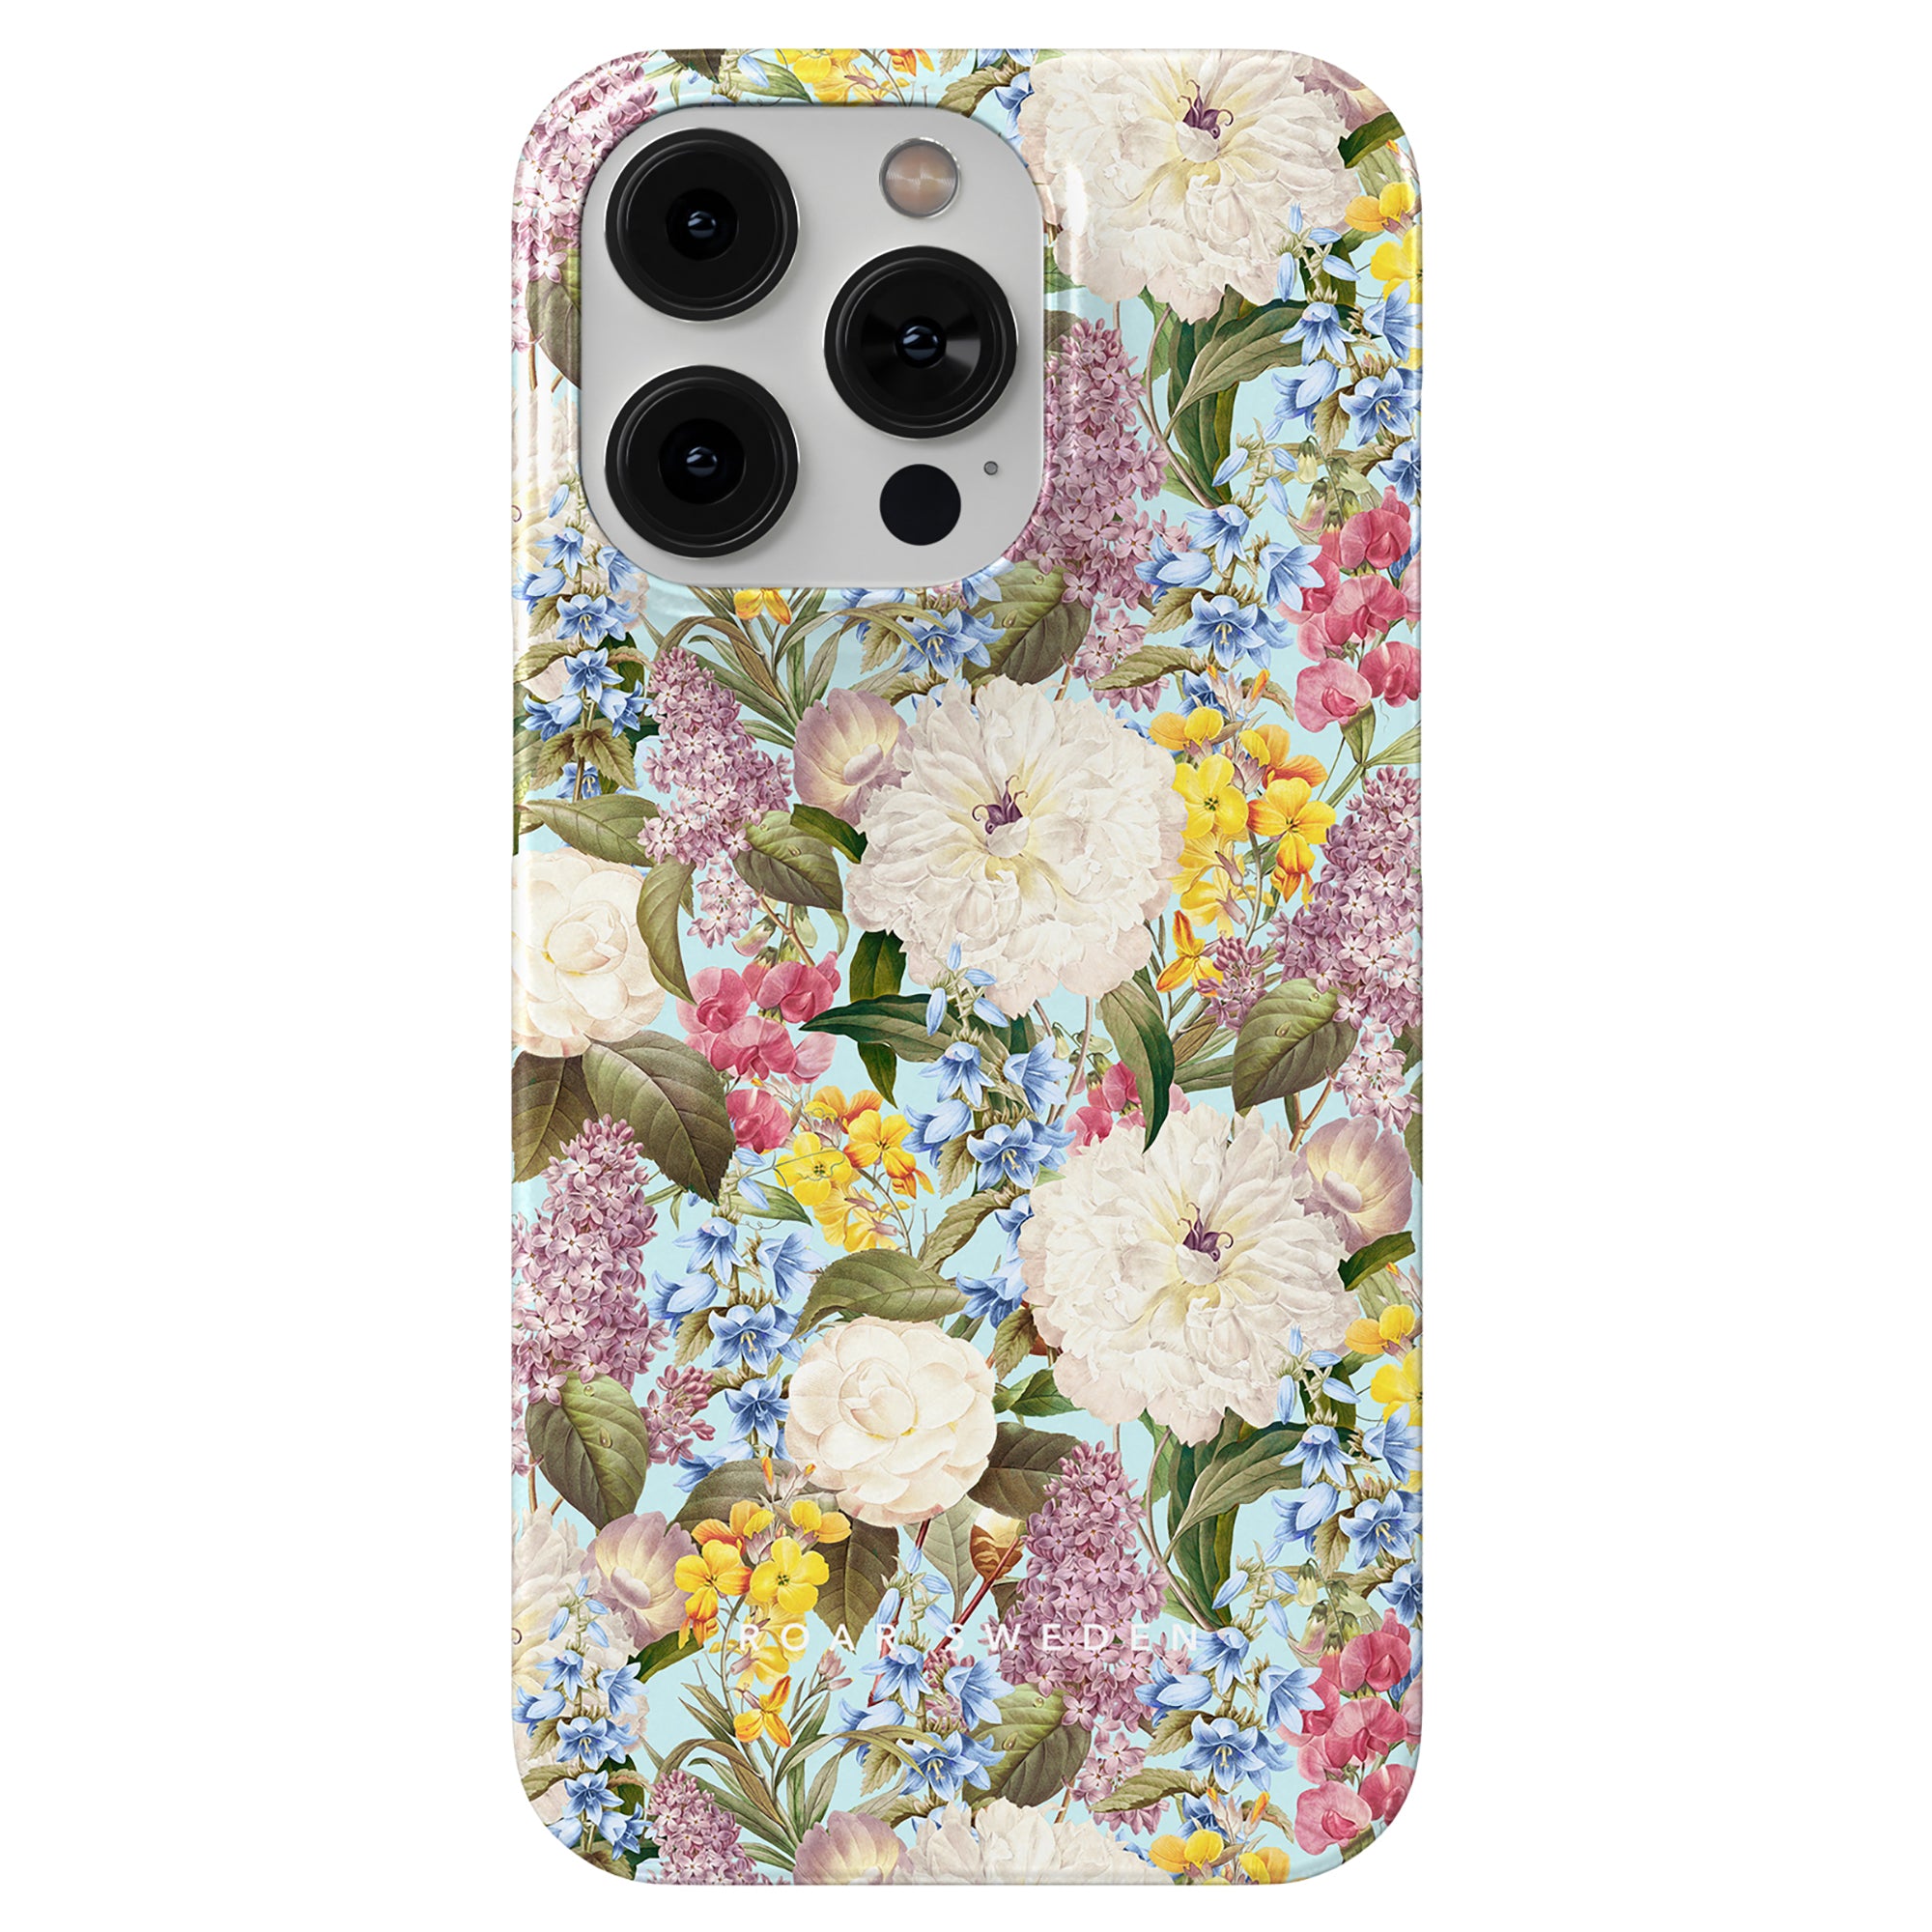 SEO-optimized product description for a Fragrant Paradise - Slim case designed for smartphones with camera cutouts.